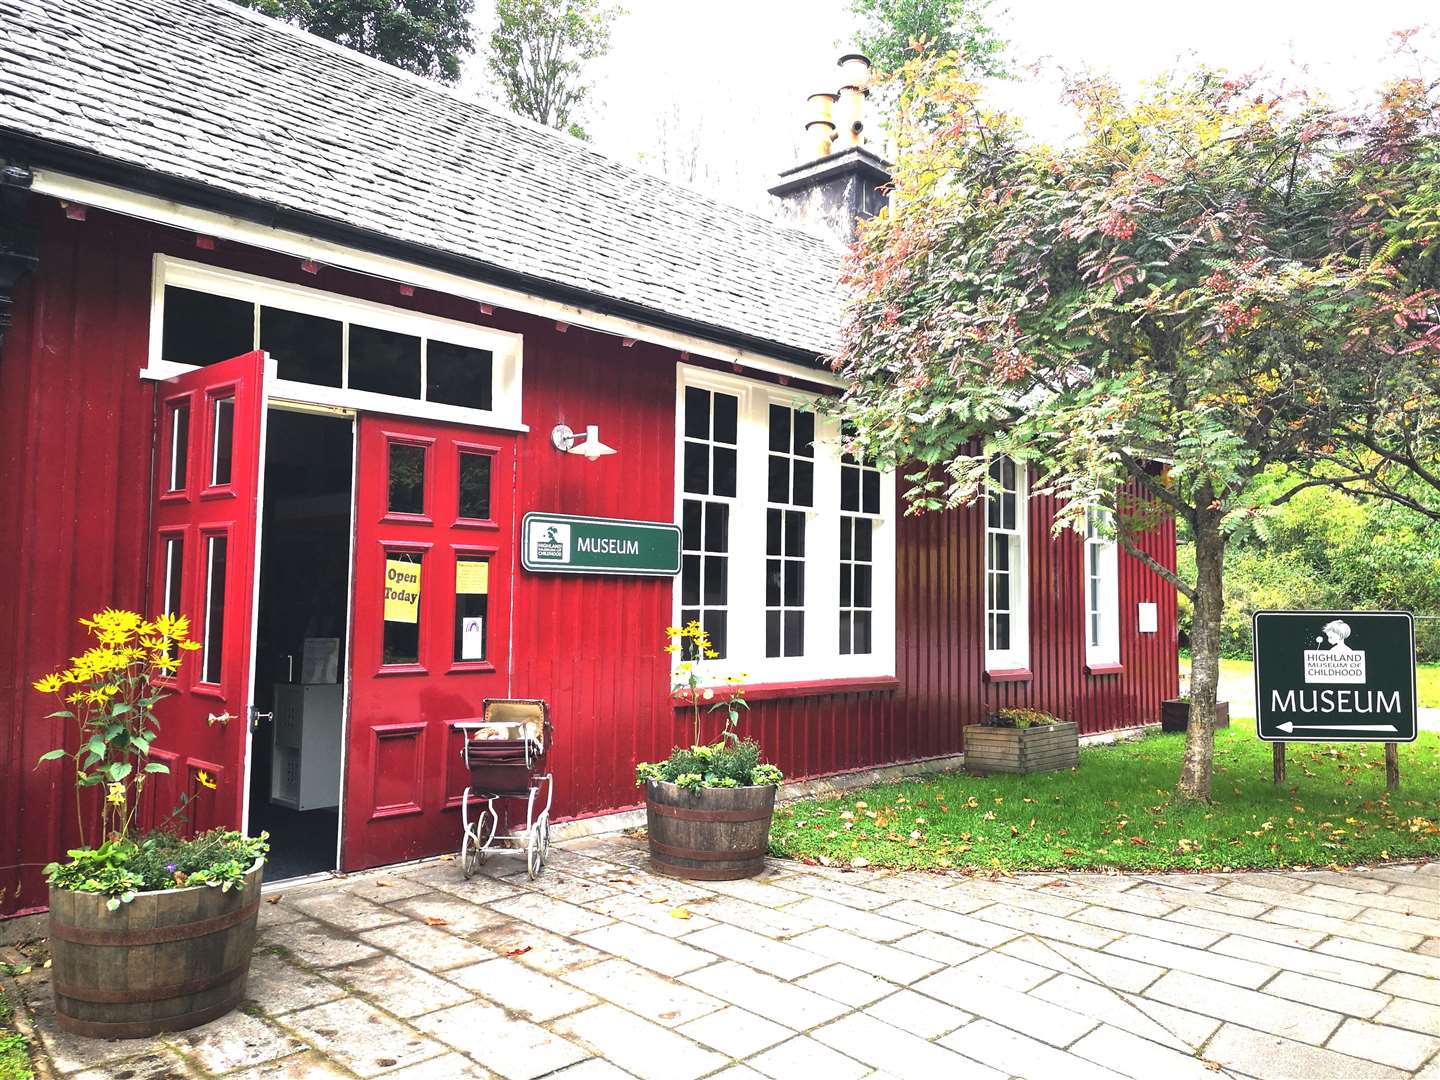 Pay a visit to the Highland Museum of Childhood while you're in Strathpeffer.